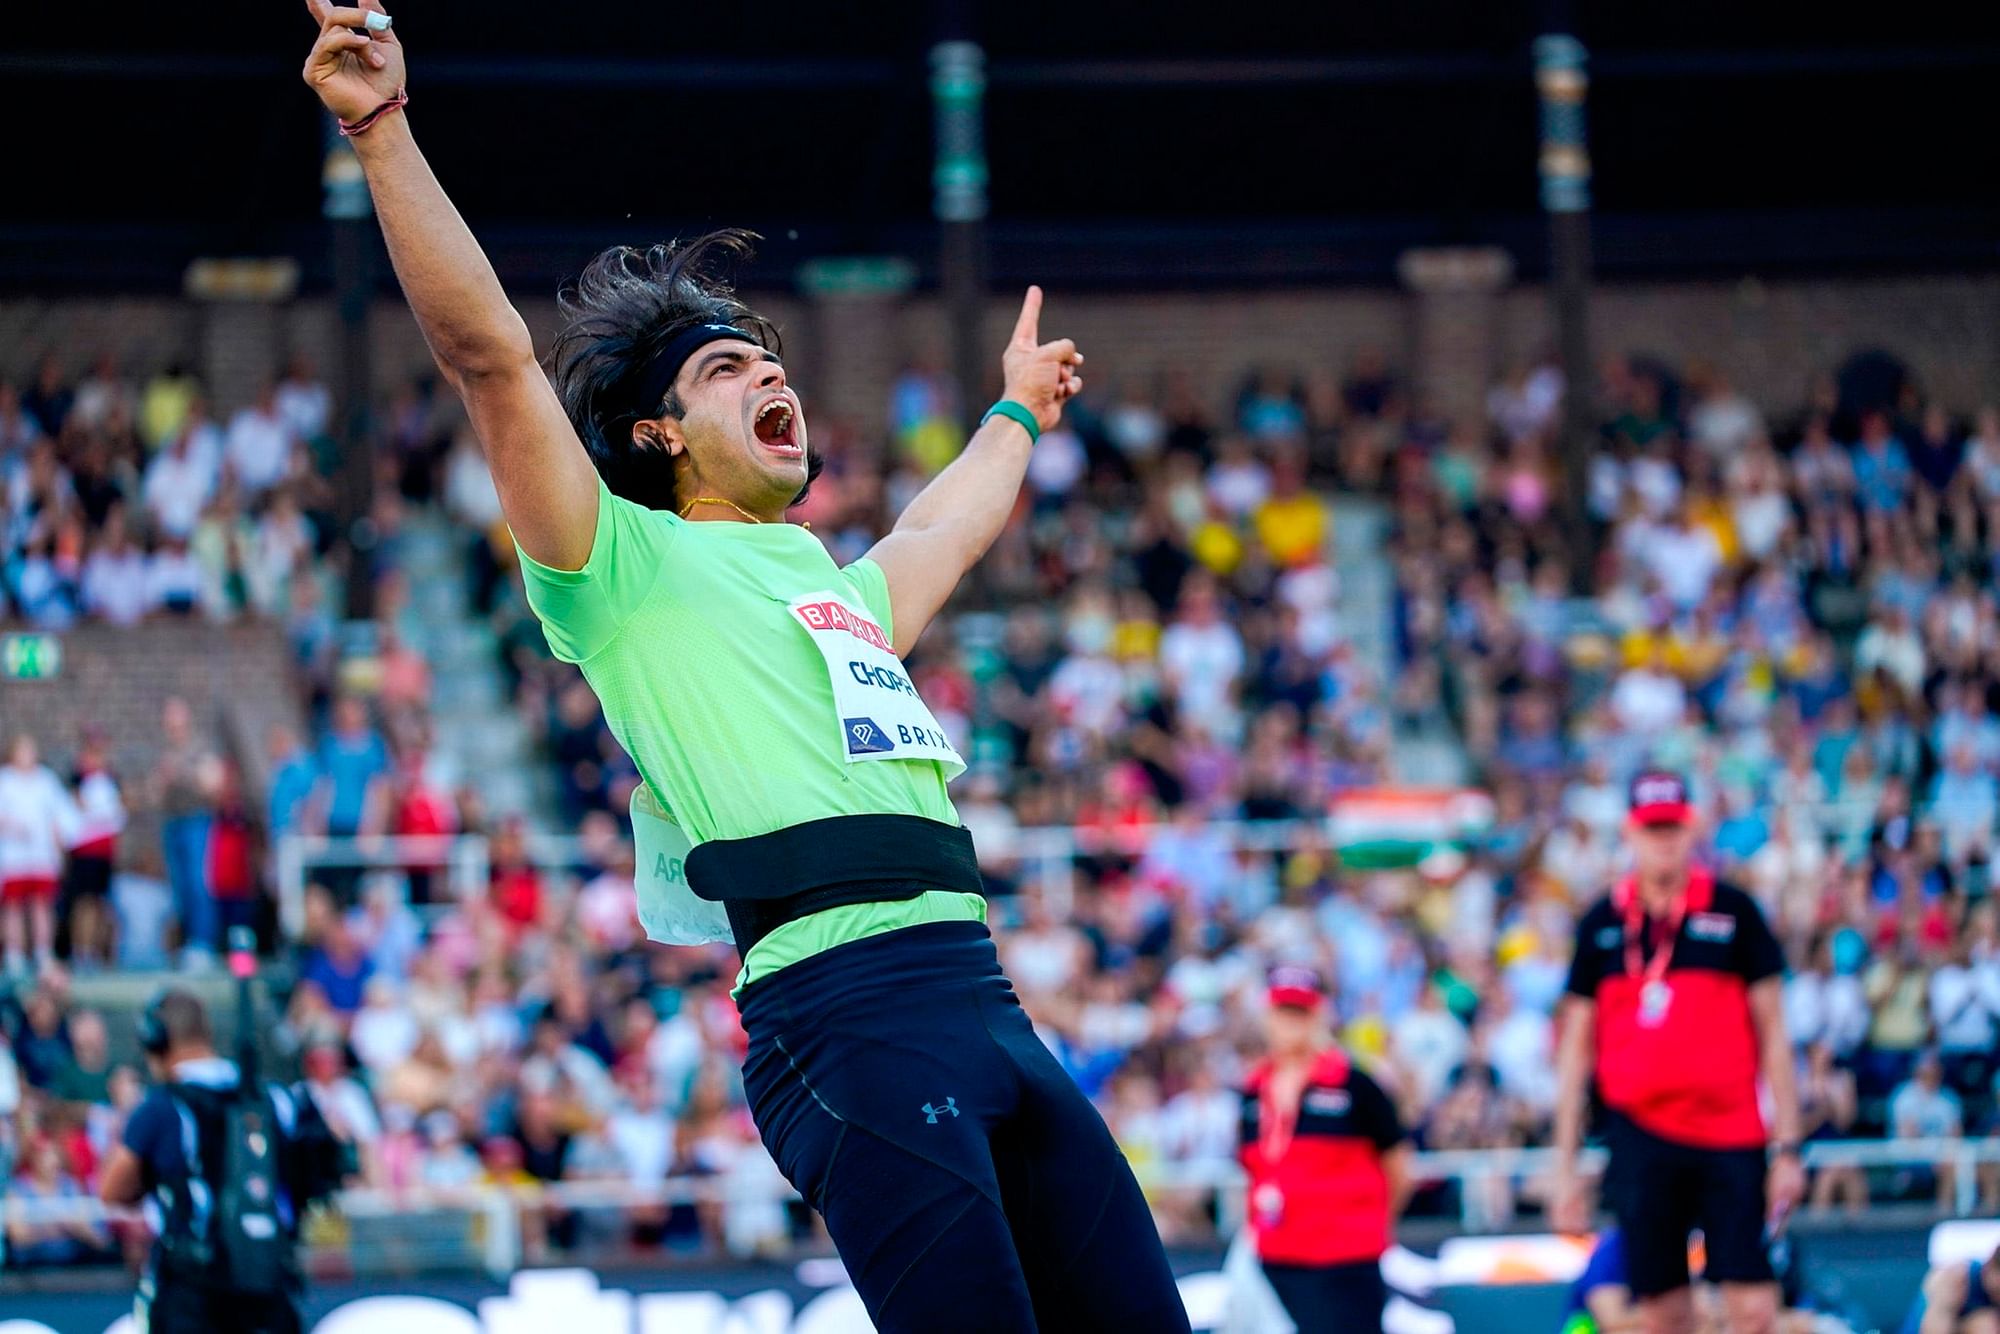 Neeraj Chopra in Action at Athletissima Diamond League 2022 When and Where To Watch Live Streaming and Telecast?